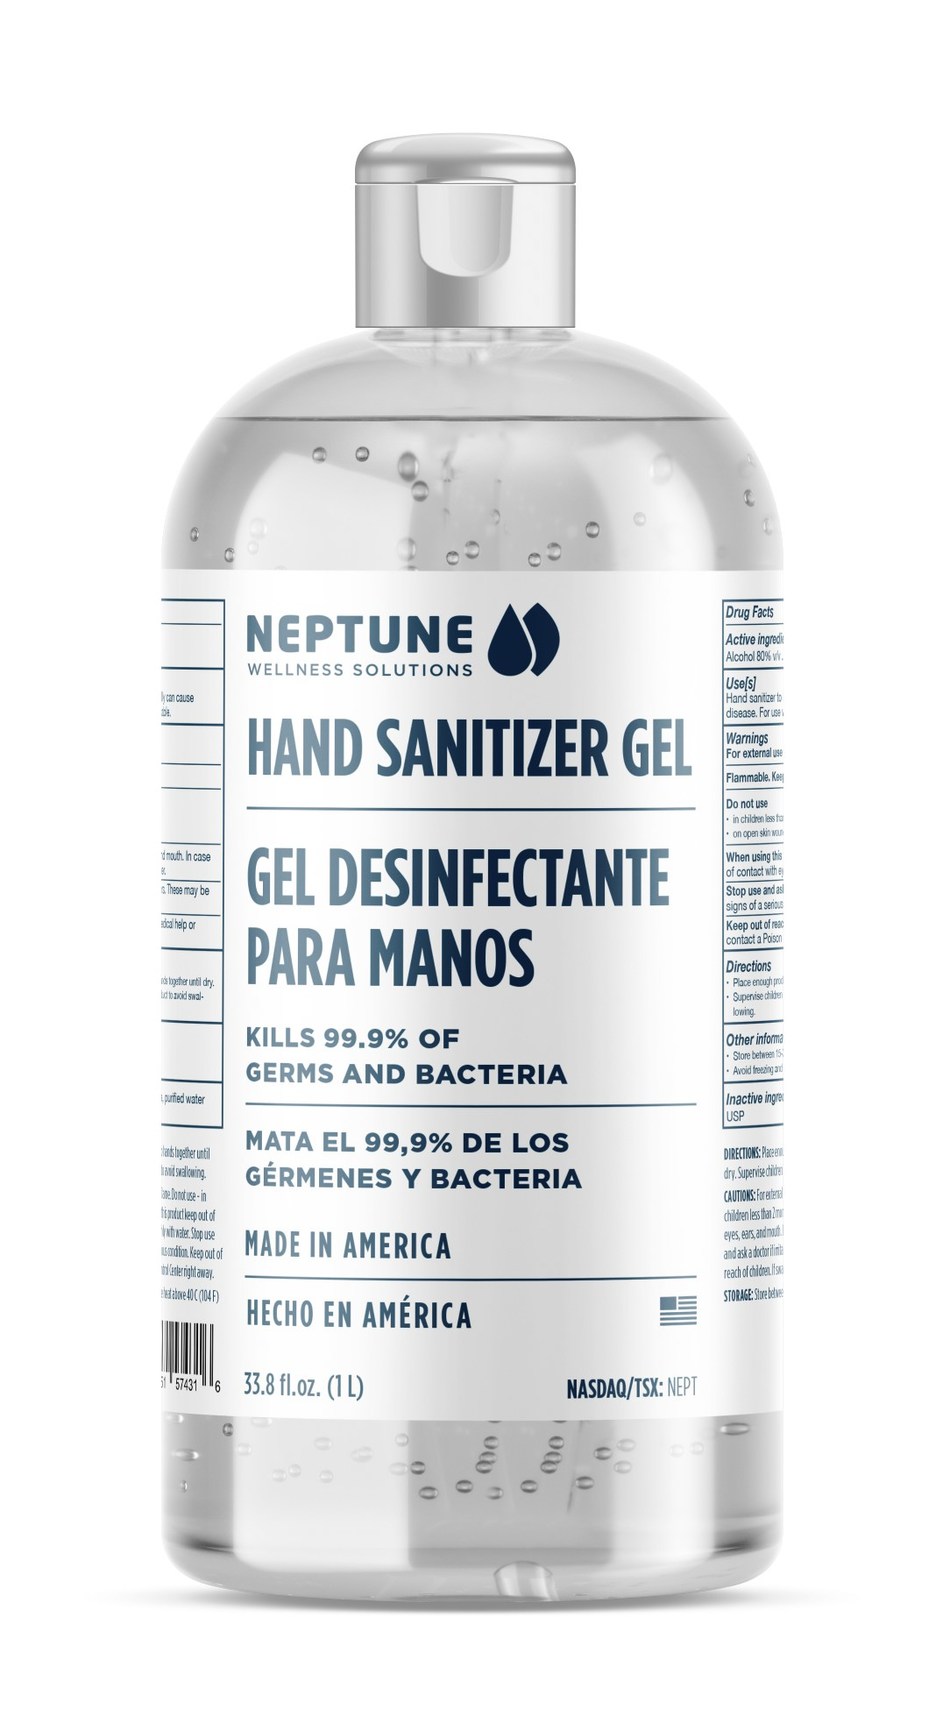 Neptune Wellness Solutions 1 Liter Hand Sanitizer Gel kills 99.9% of germs and bacteria (CNW Group/Neptune Wellness Solutions Inc.)